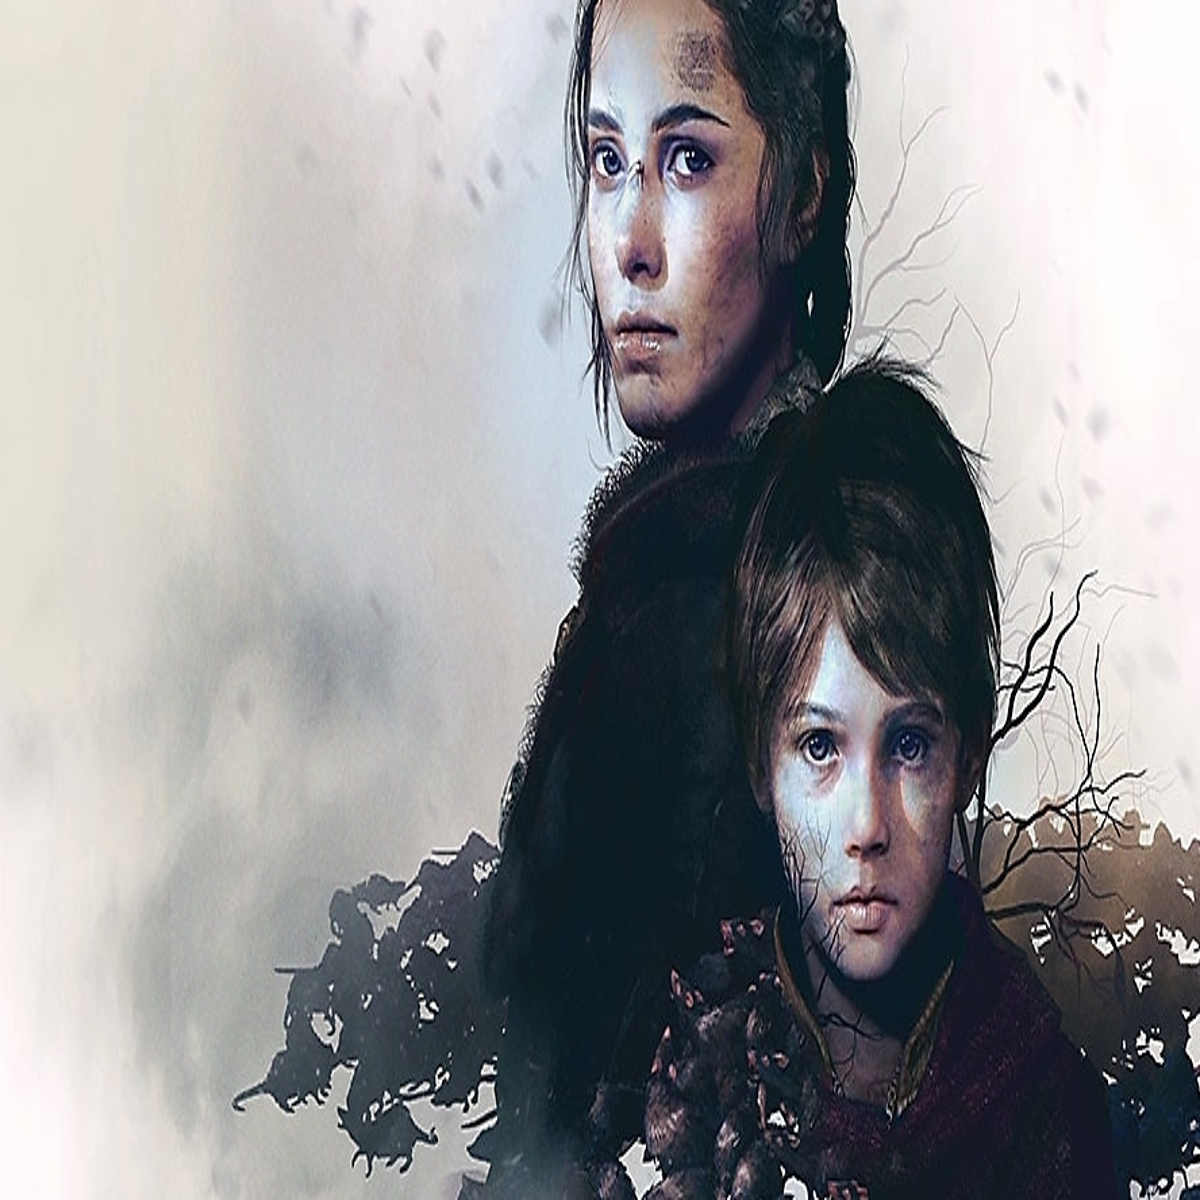 A Plague Tale: Innocence Review - Review - Nintendo World Report